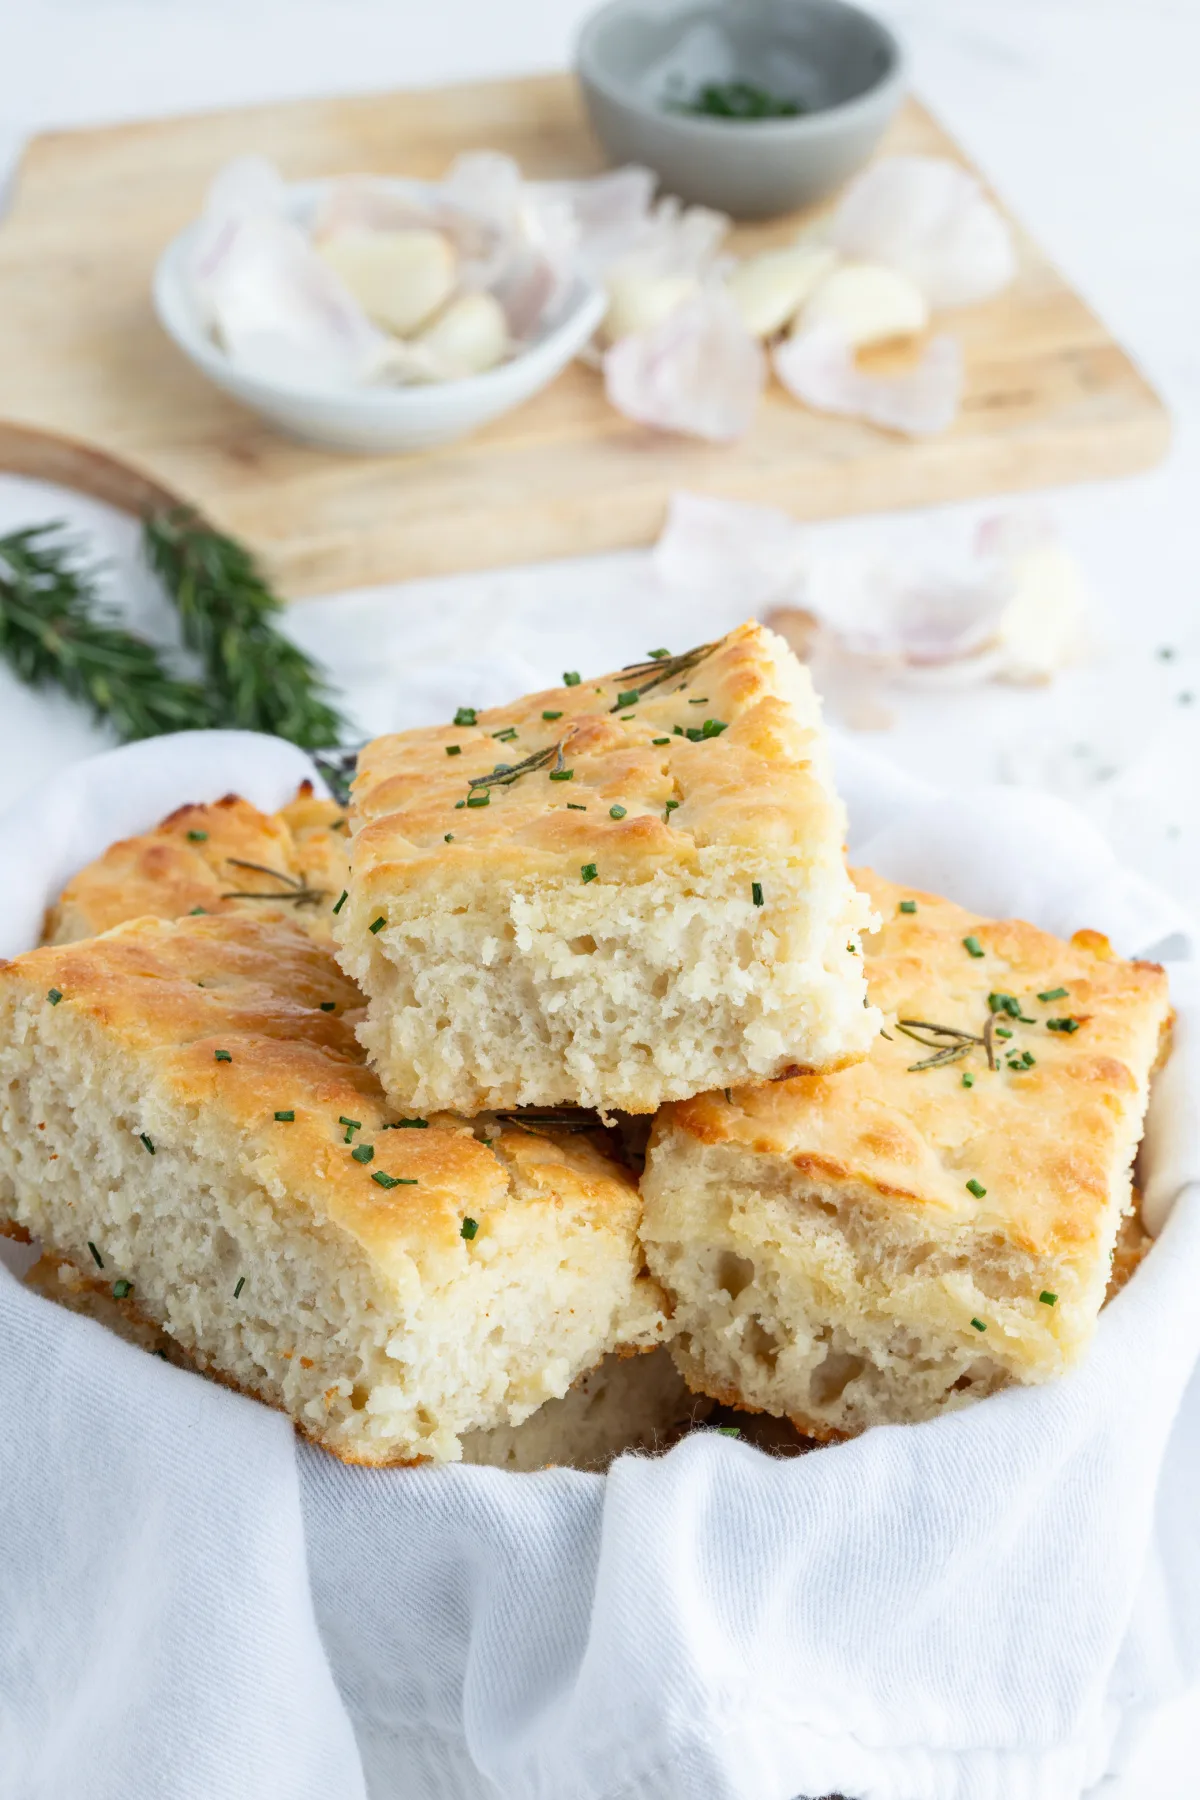 rosemary garlic butter bath biscuits in serving dish lined with cloth